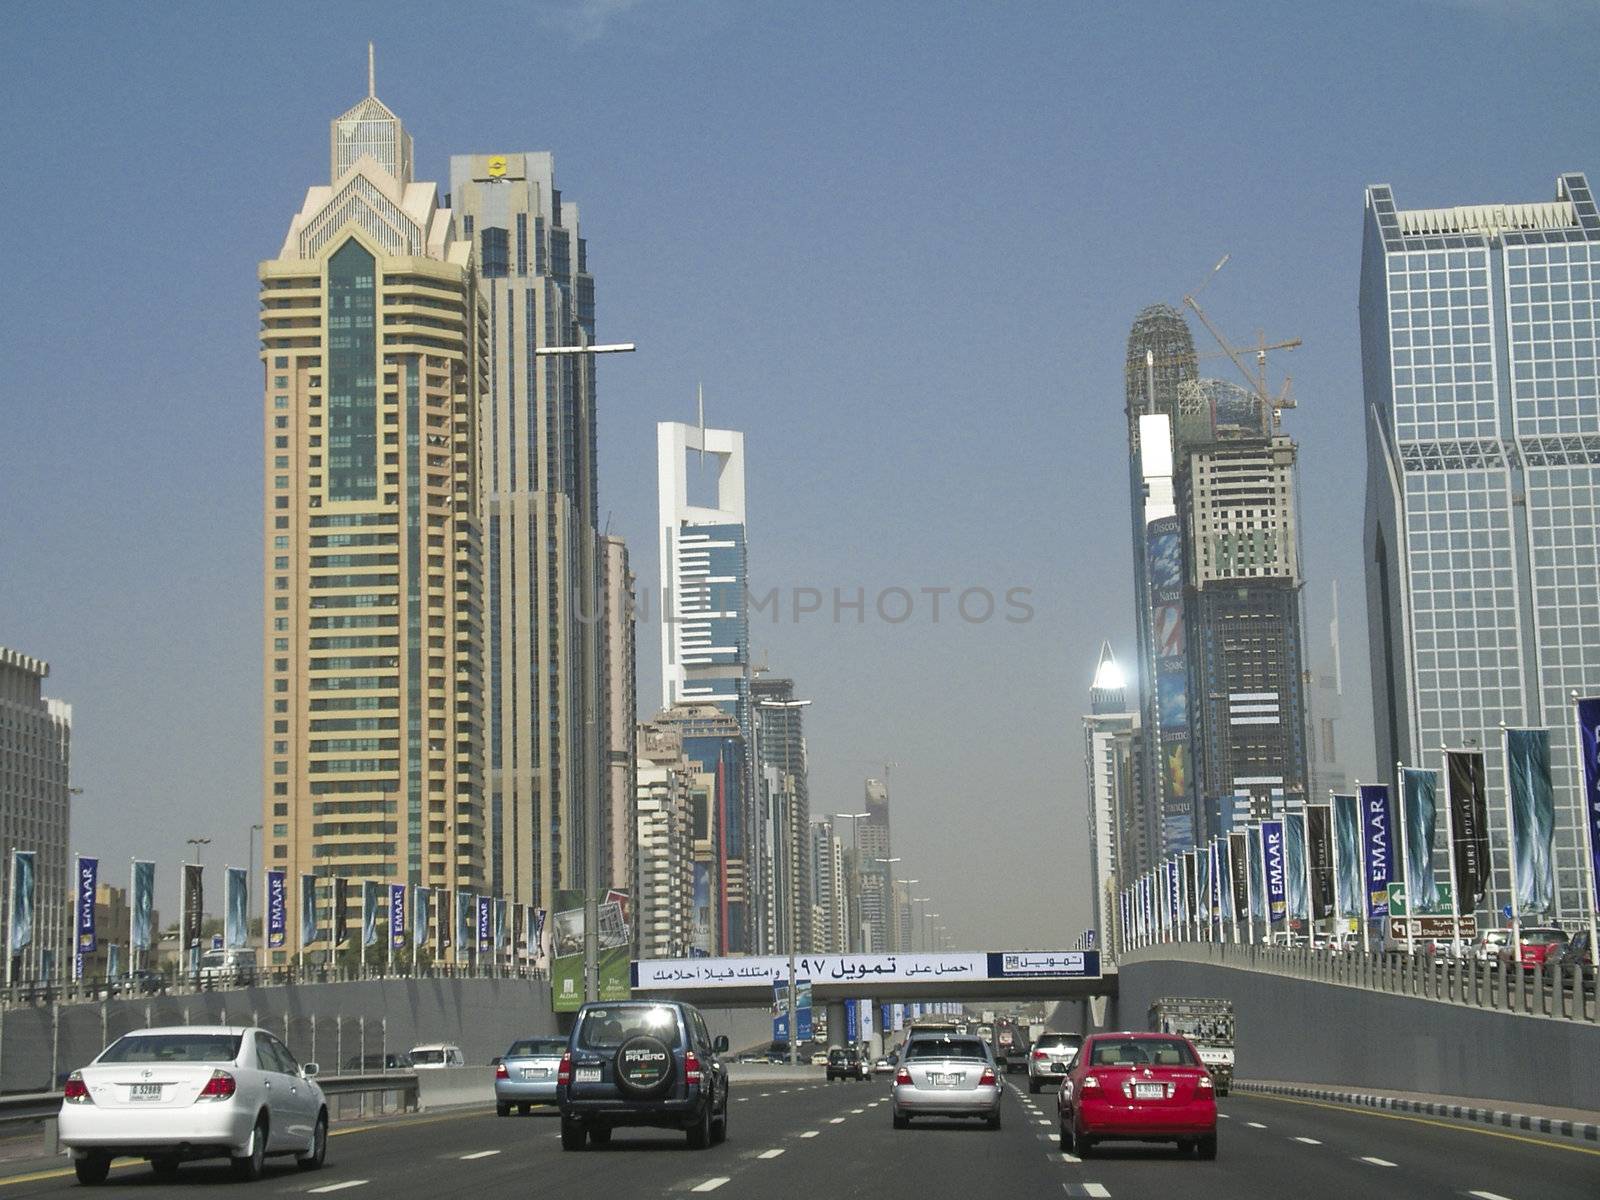 Busy road in Dubai surrounded by buildings